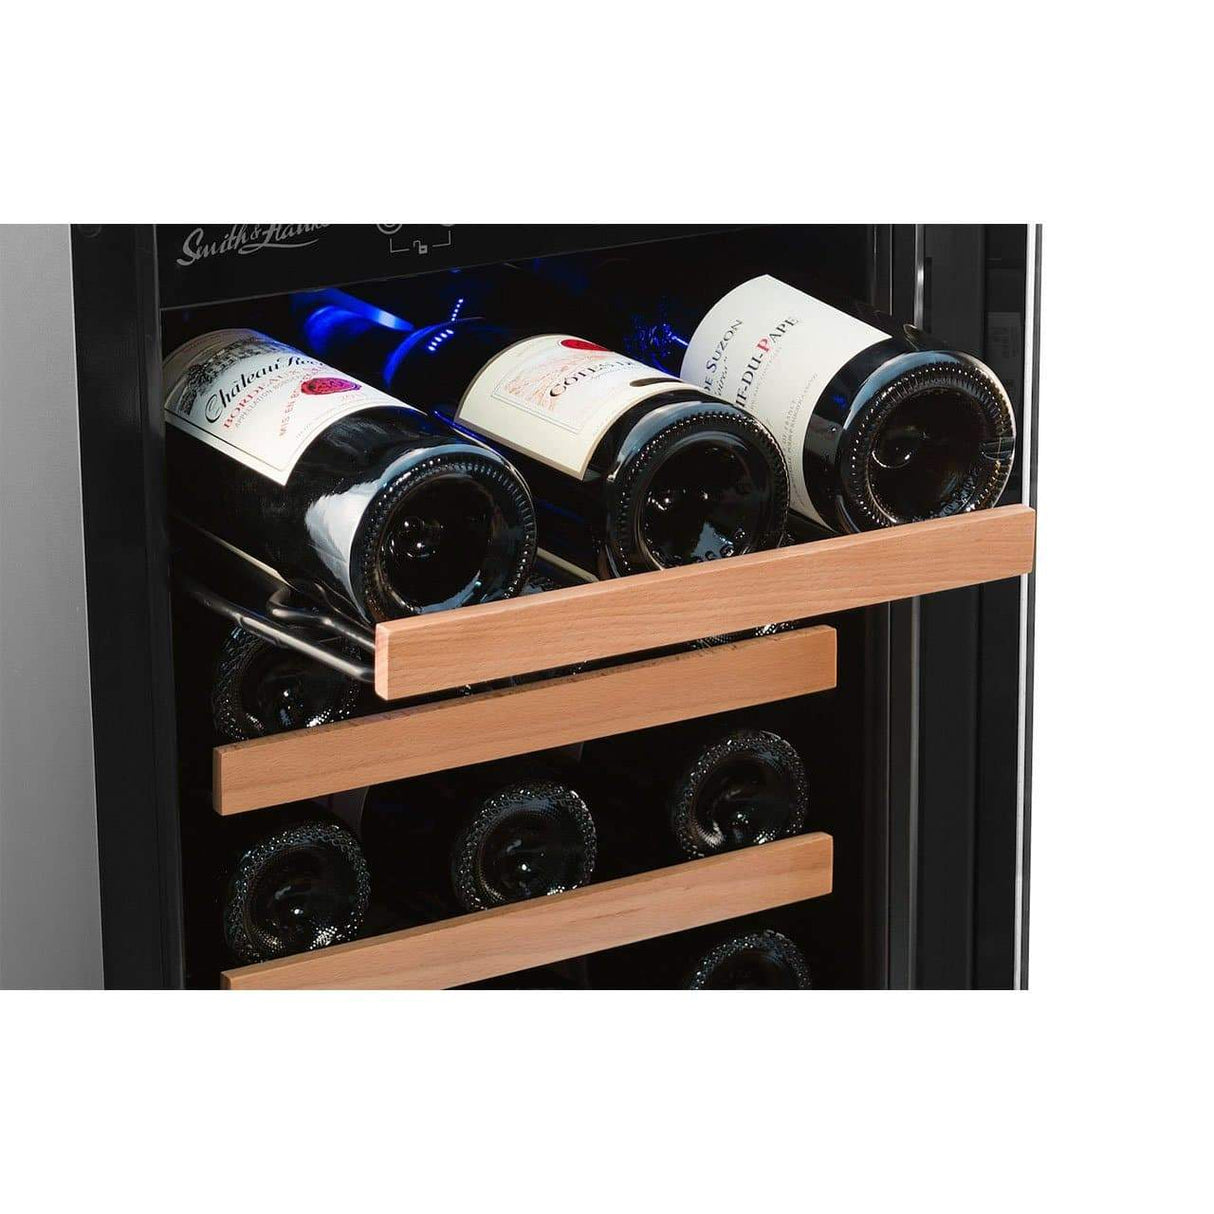 Smith and Hanks RW88DR 32 Bottle Dual Zone Wine Cooler - RE100006